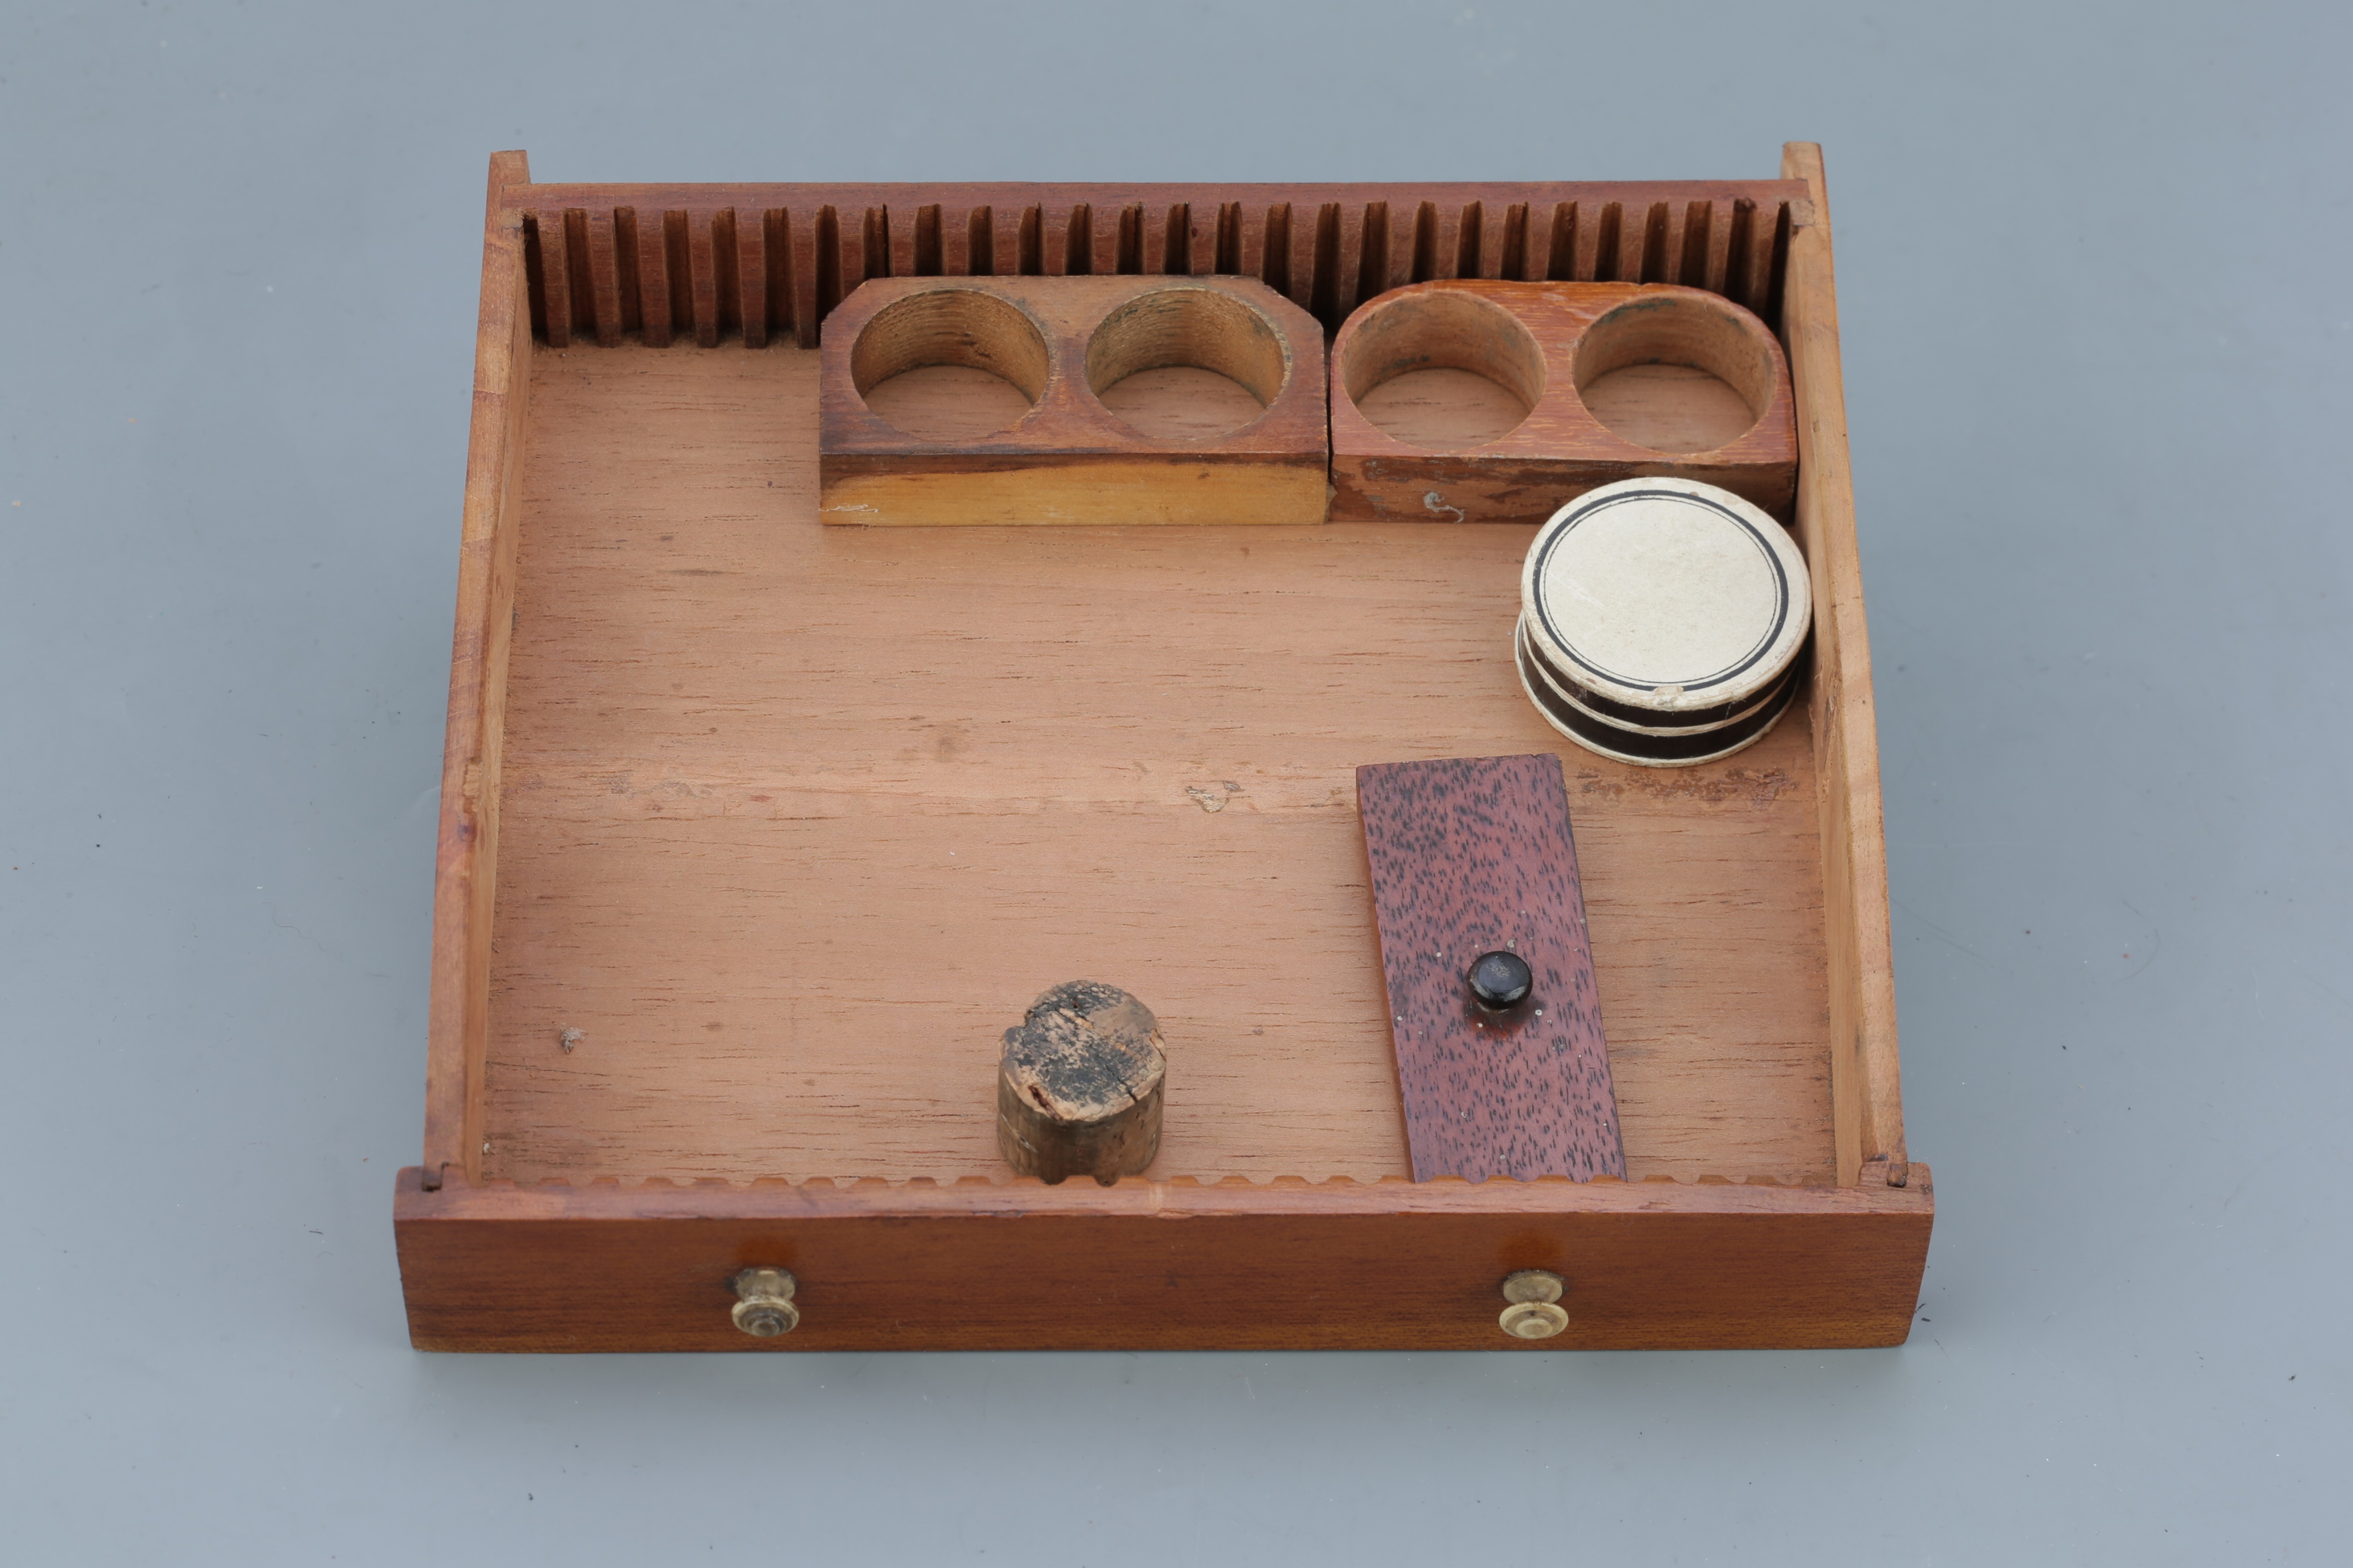 Microscope SlideCabinet & Slide Collection, - Image 14 of 15